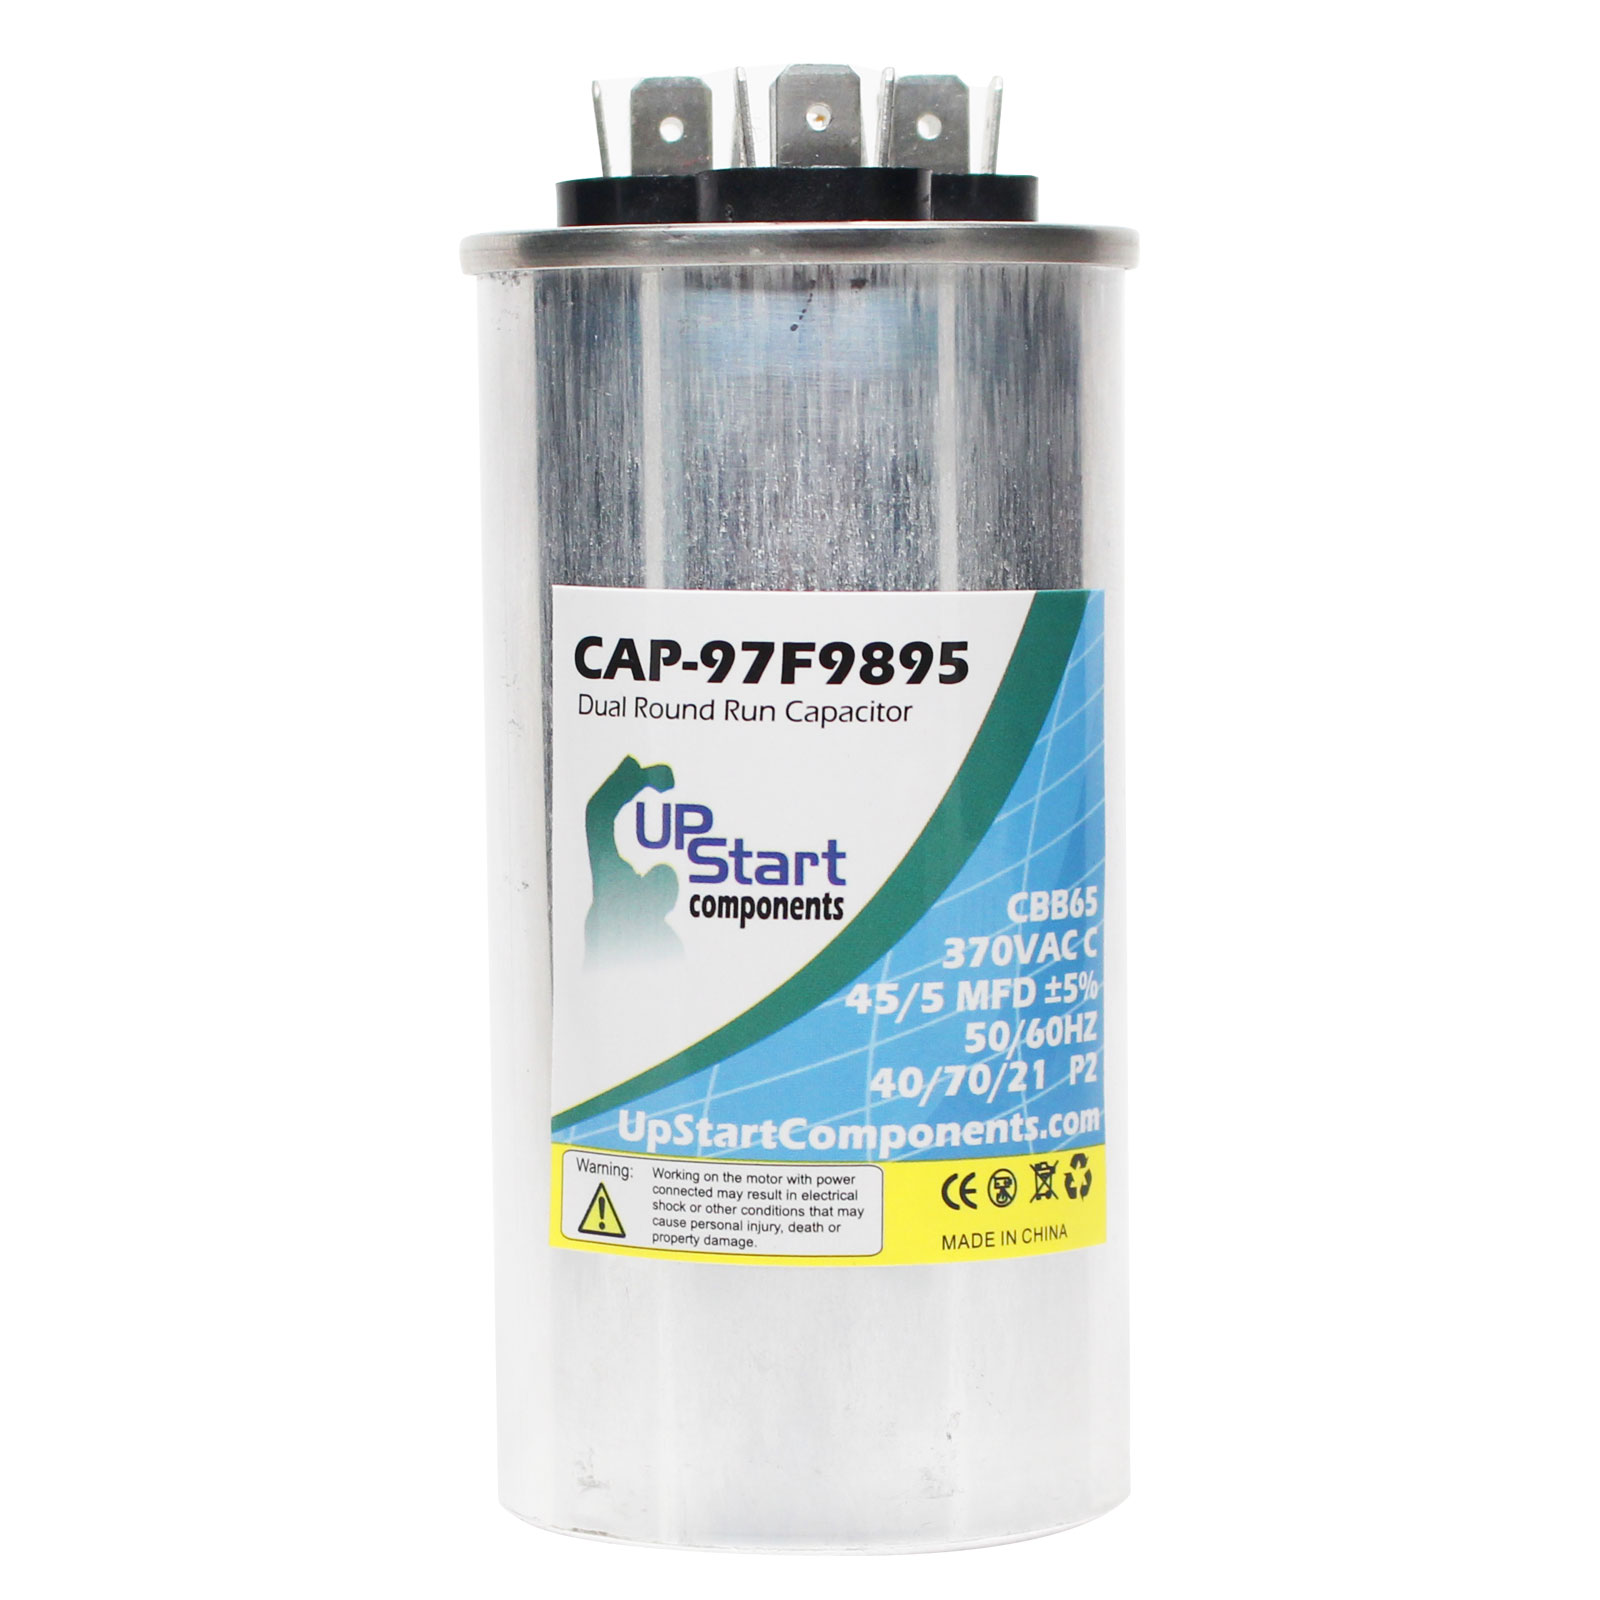 UpStart Components 45/5 MFD 370 Volt Dual Round Run Capacitor Replacement for Carrier 583BNW036090AAAF - CAP-97F9895